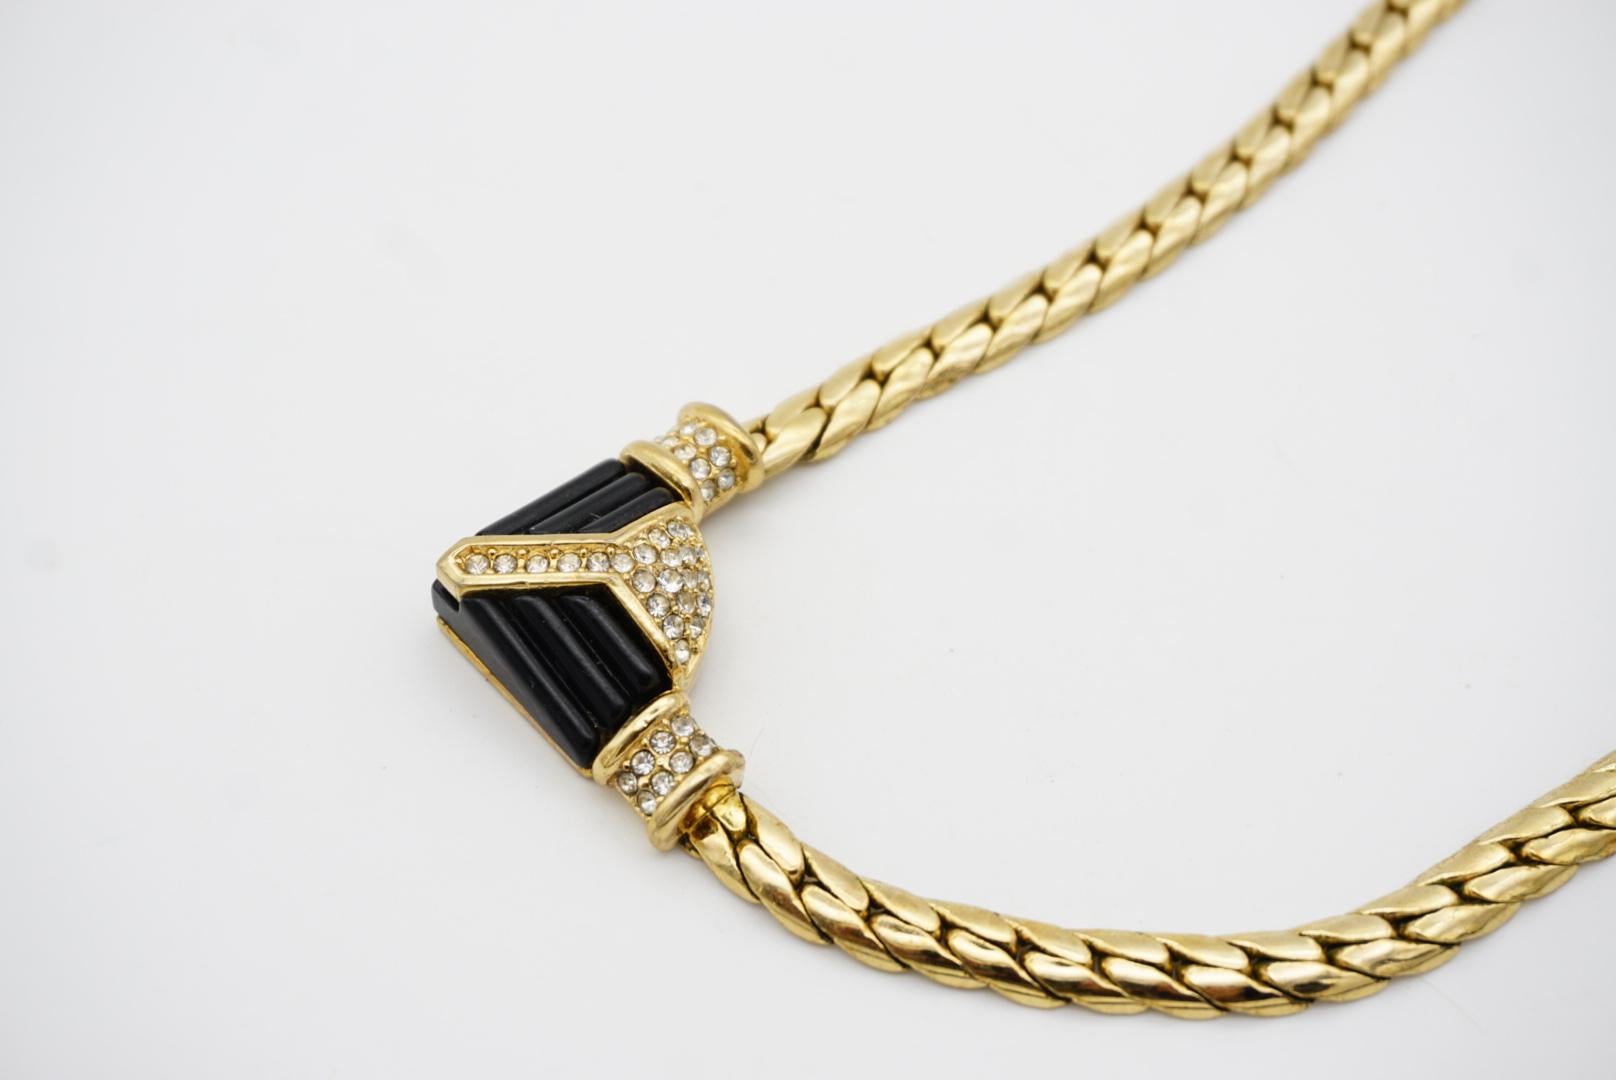 Christian Dior Vintage 1970s Crystals Black Triangle Chunky Pendant Necklace For Sale 4